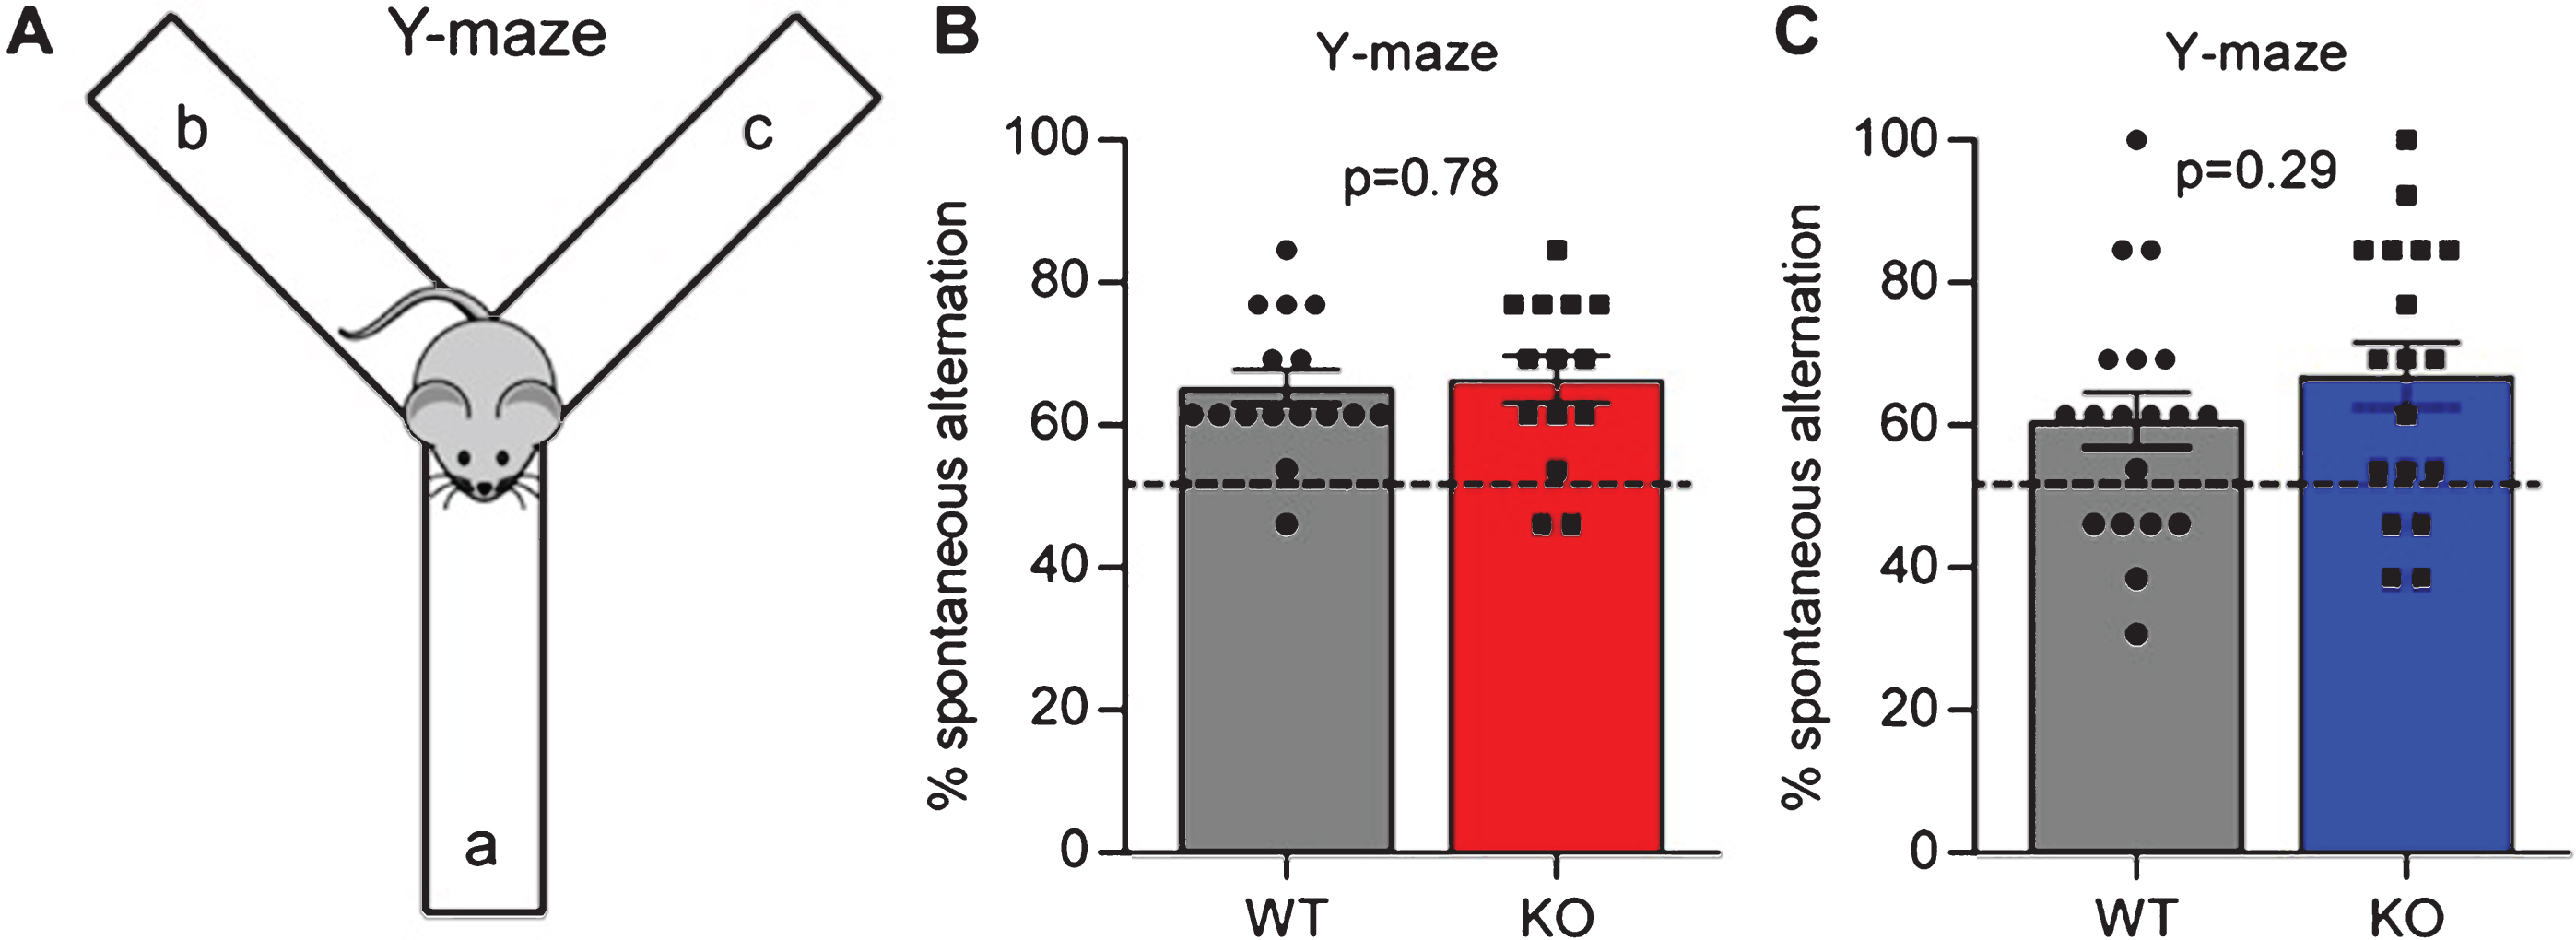 Gpc4 KO mice show no deficits in working memory. A. Schematic of the Y-maze used to test spontaneous alternation and working memory. B. Gpc4 KO and WT P90 mice on a C57Bl6/J background perform better than chance in the Y-maze spontaneous alternation test, with no significant difference in performance between genotypes. N = 16 WT, 14 Gpc4 KO. C. Gpc4 KO and WT P90 mice on an FVB background perform better than chance in the Y-maze spontaneous alternation test, with no significant difference in performance between genotypes. N = 19 WT, 18 Gpc4 KO (FVB). Statistics by T-test, bar graph mean±s.e.m., individual points represent mice, dashed line represents chance (50% spontaneous alternation).